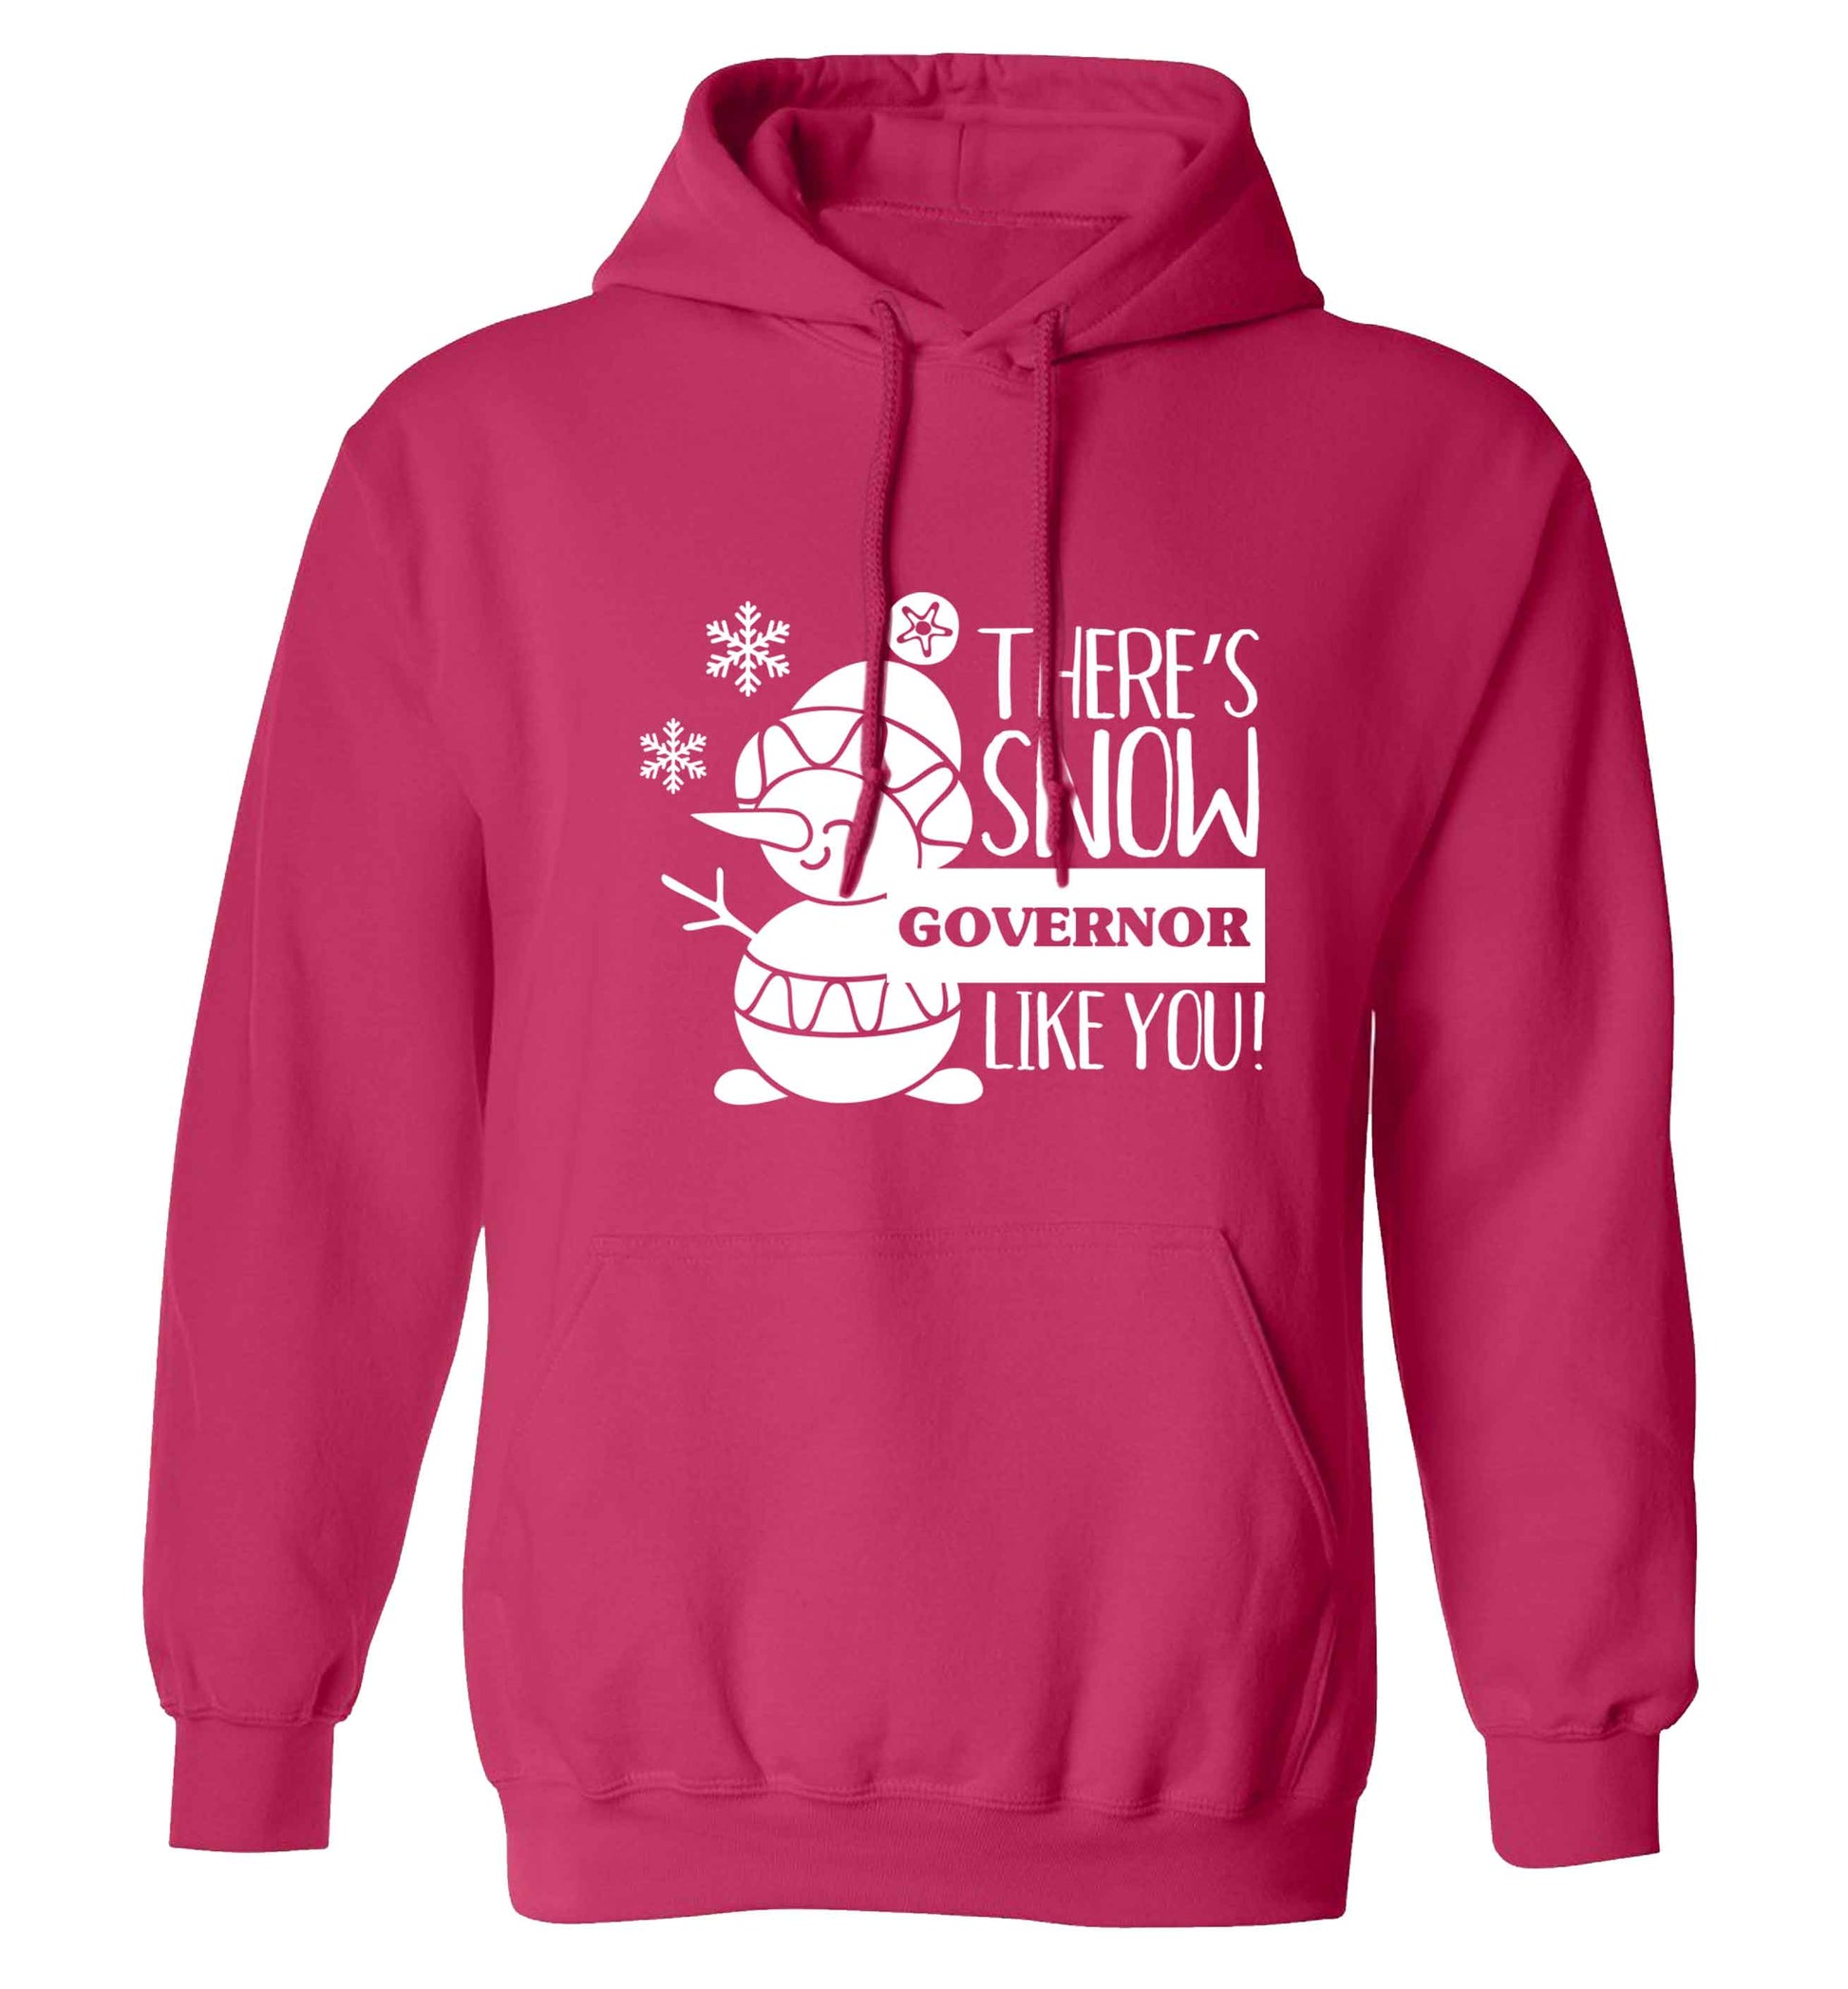 There's snow governor like you adults unisex pink hoodie 2XL